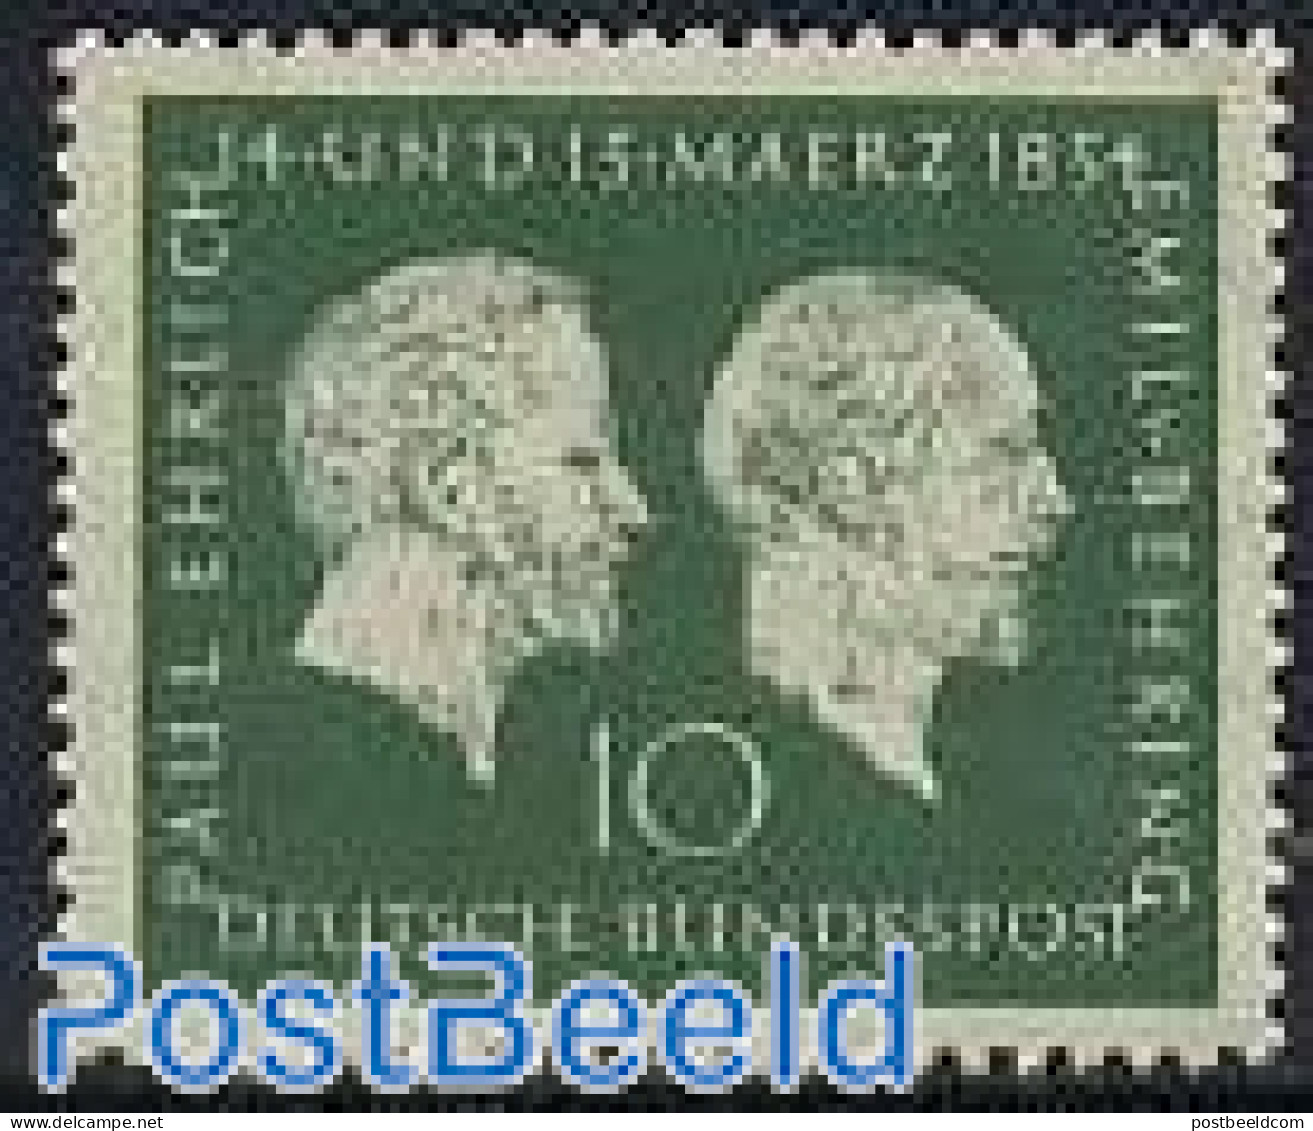 Germany, Federal Republic 1954 Ehrlich, Behring 1v, Mint NH, Health - History - Science - Health - Nobel Prize Winners.. - Neufs